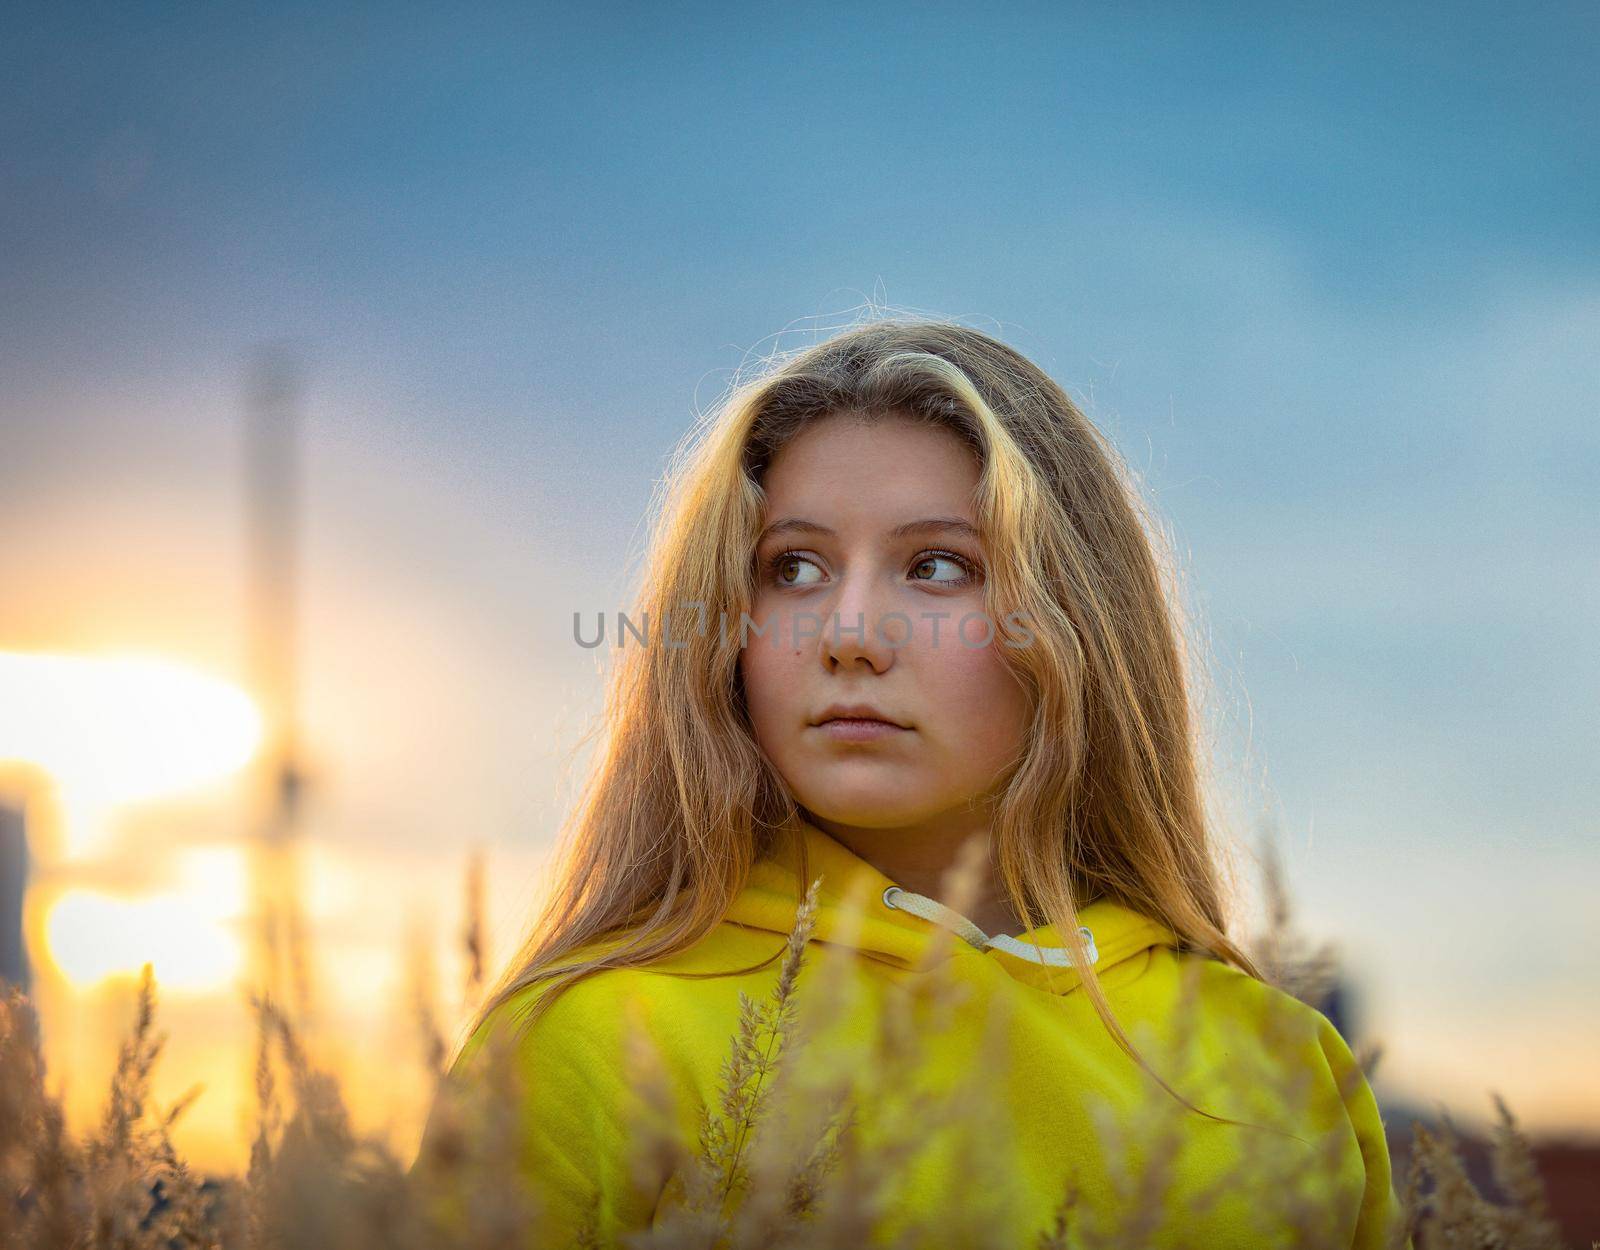 A young girl with long hair walks across a field with tall grass. Blonde hair. Yellow jacket.